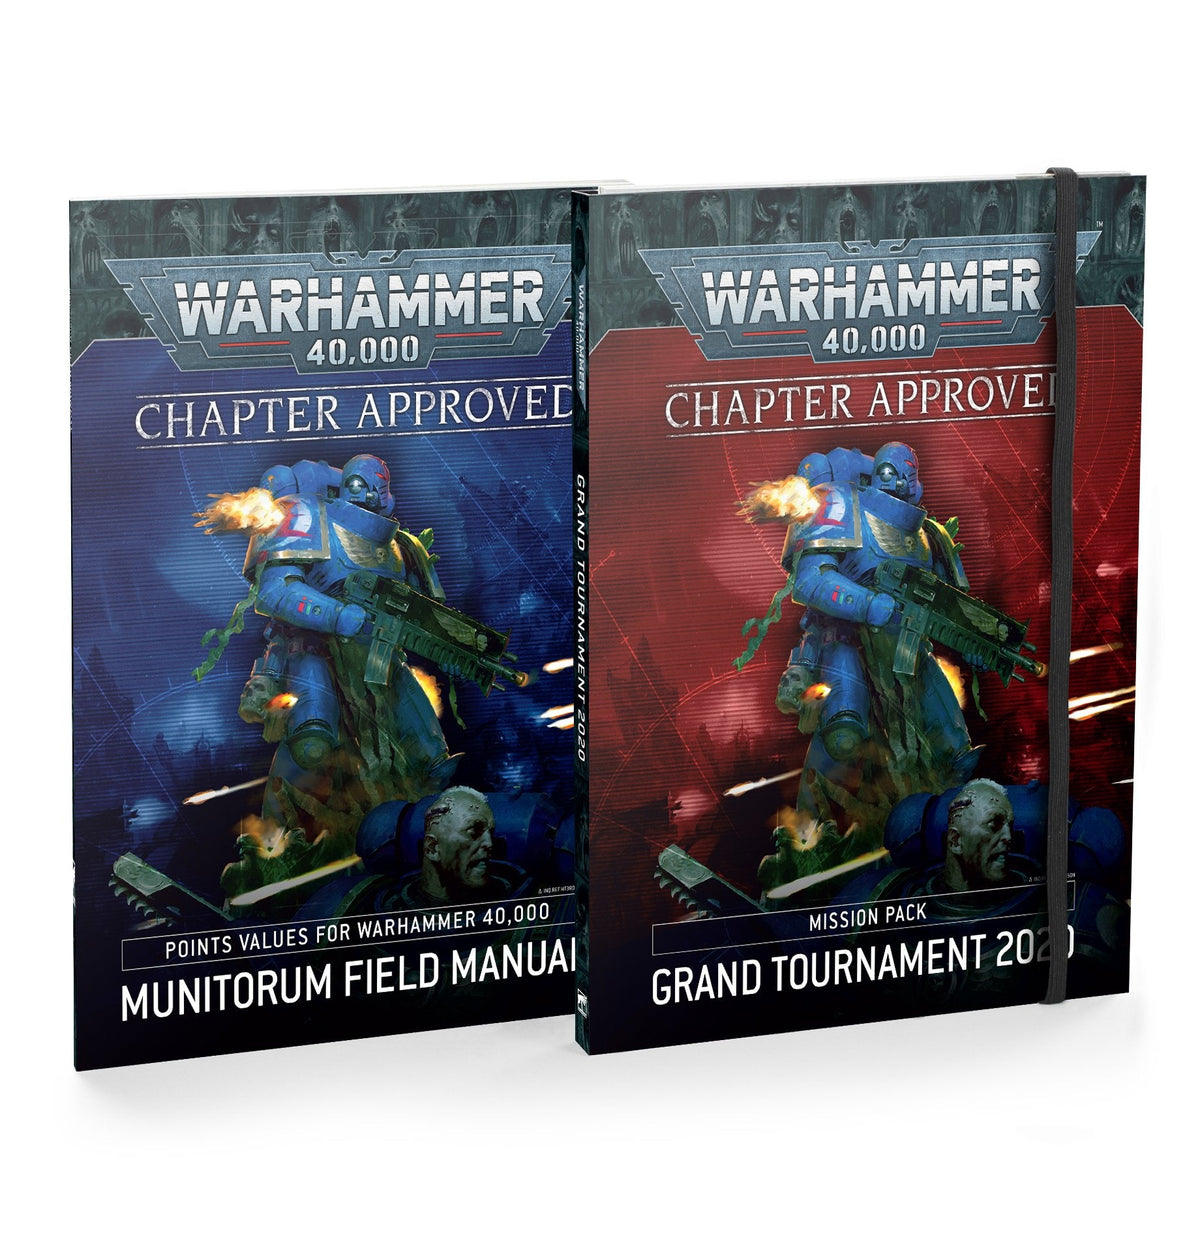 Chapter Approved - Grand Tournament 2020 and Munitorum Field Manual (Warhammer 40000)